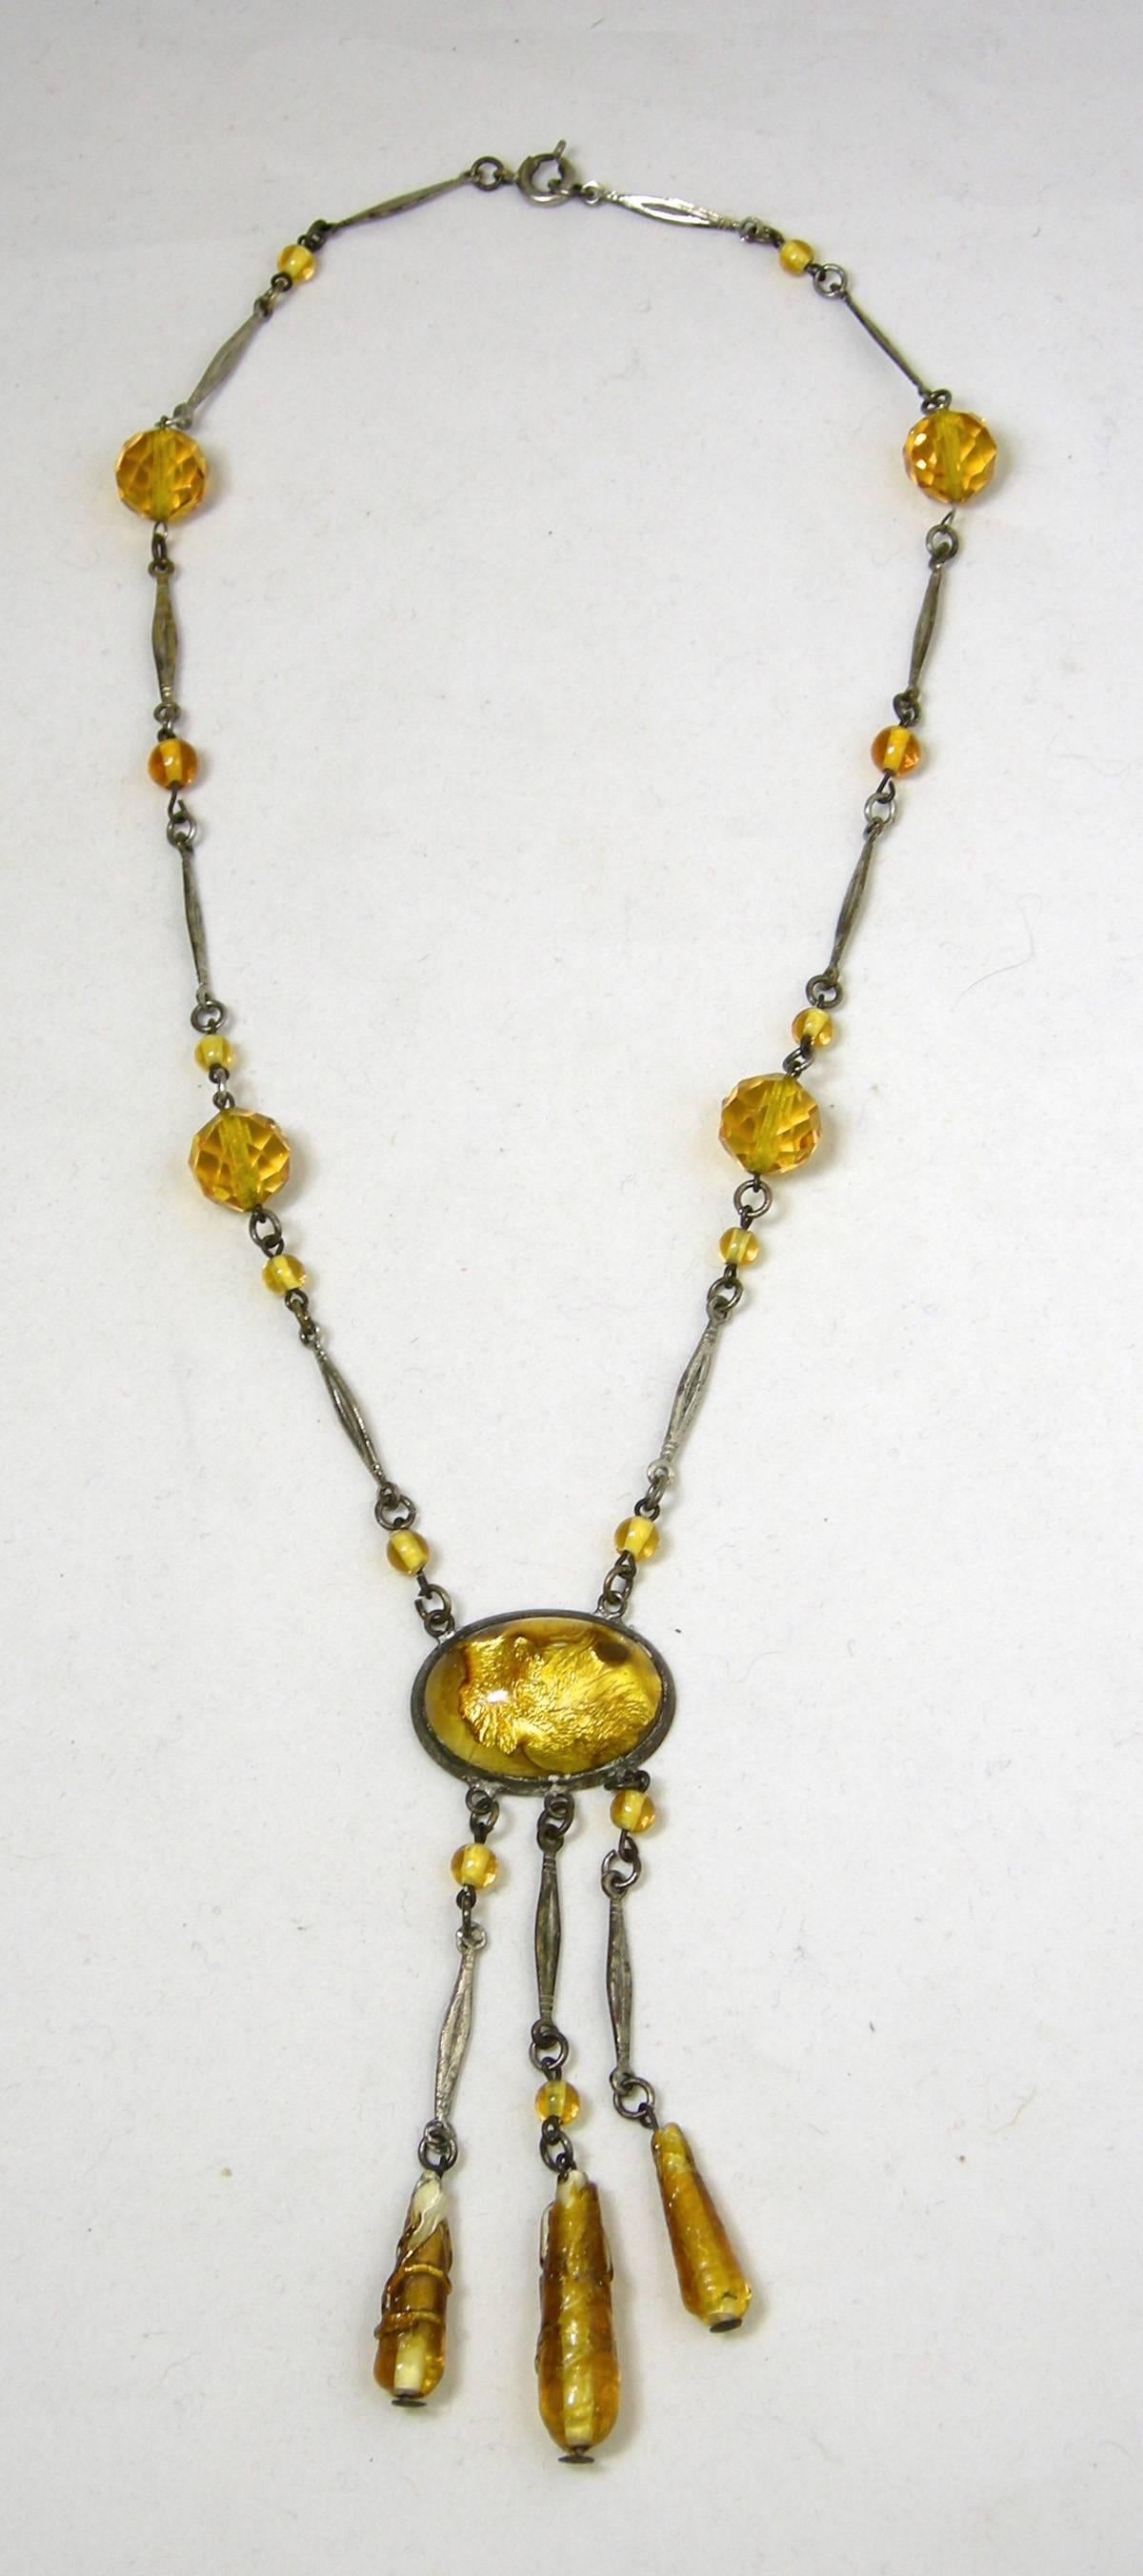 This beautiful early Czech necklace is in sterling or silver plate with stunning amber glass beads. The necklace is 17” long.  It has a mark, but I can’t make it out. The centerpiece is foil glass and measures 1” x 3-3/8” long with amber glass